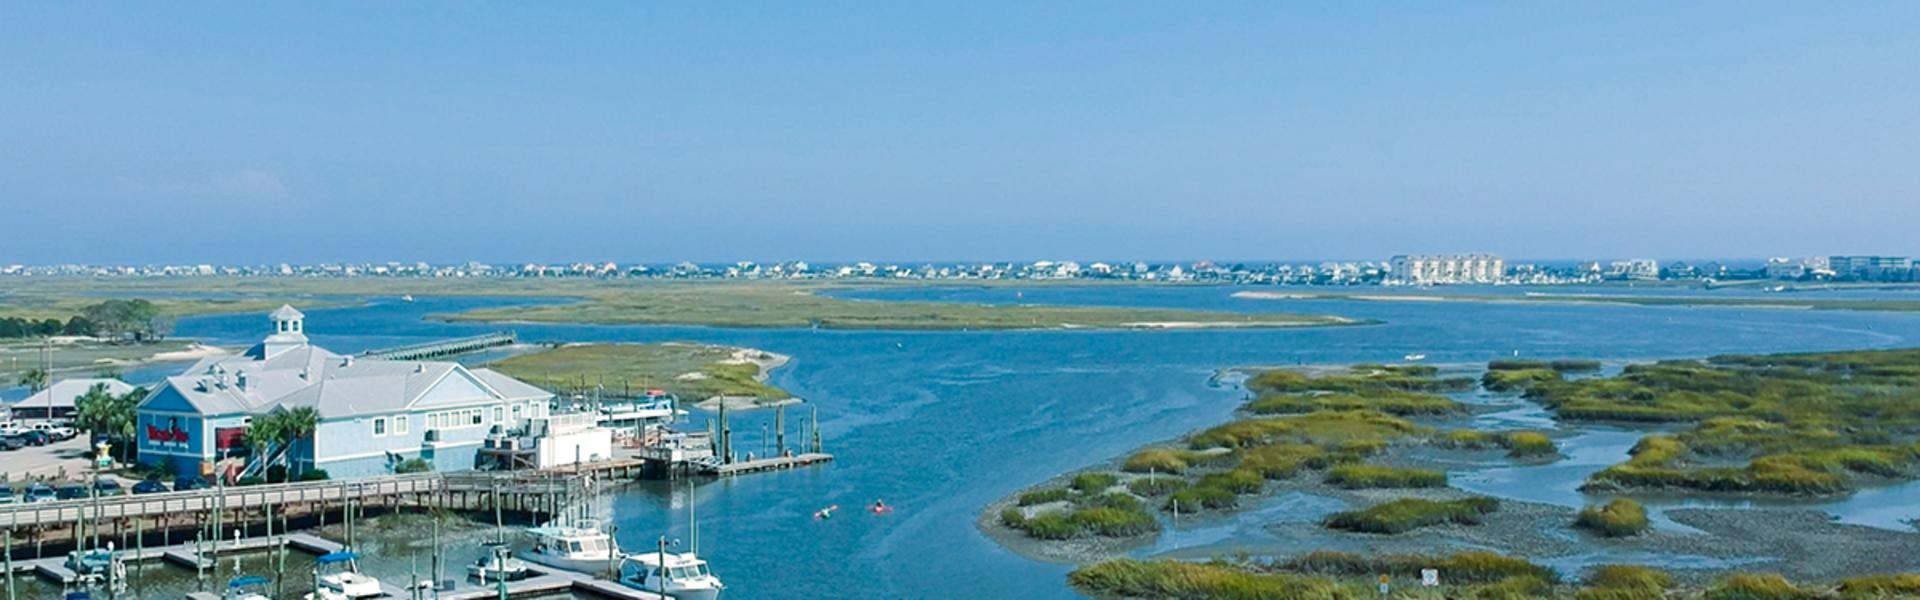 murrells inlet paddle board location